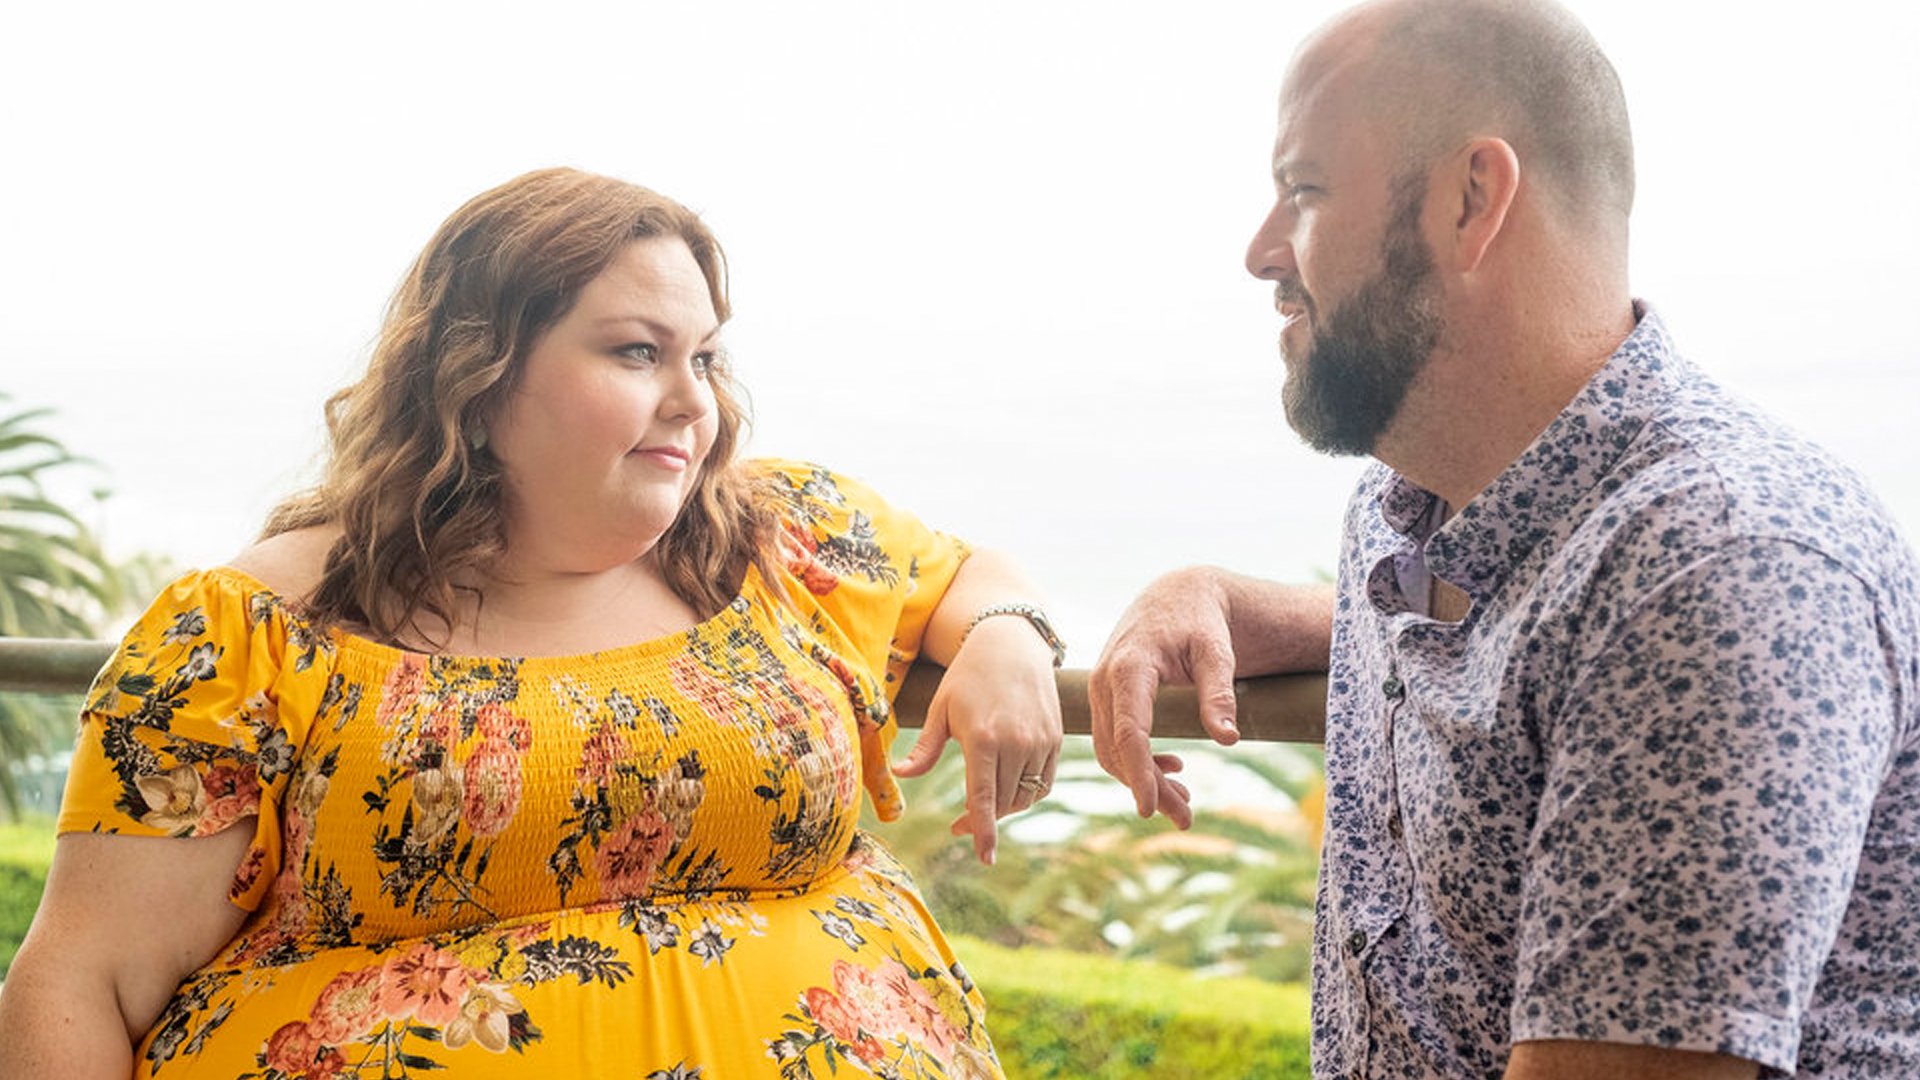 Chrissy Metz as Kate and Chris Sullivan as Toby talking in ‘This Is Us’ Season 5 Episode 16, ‘The Adirondacks’